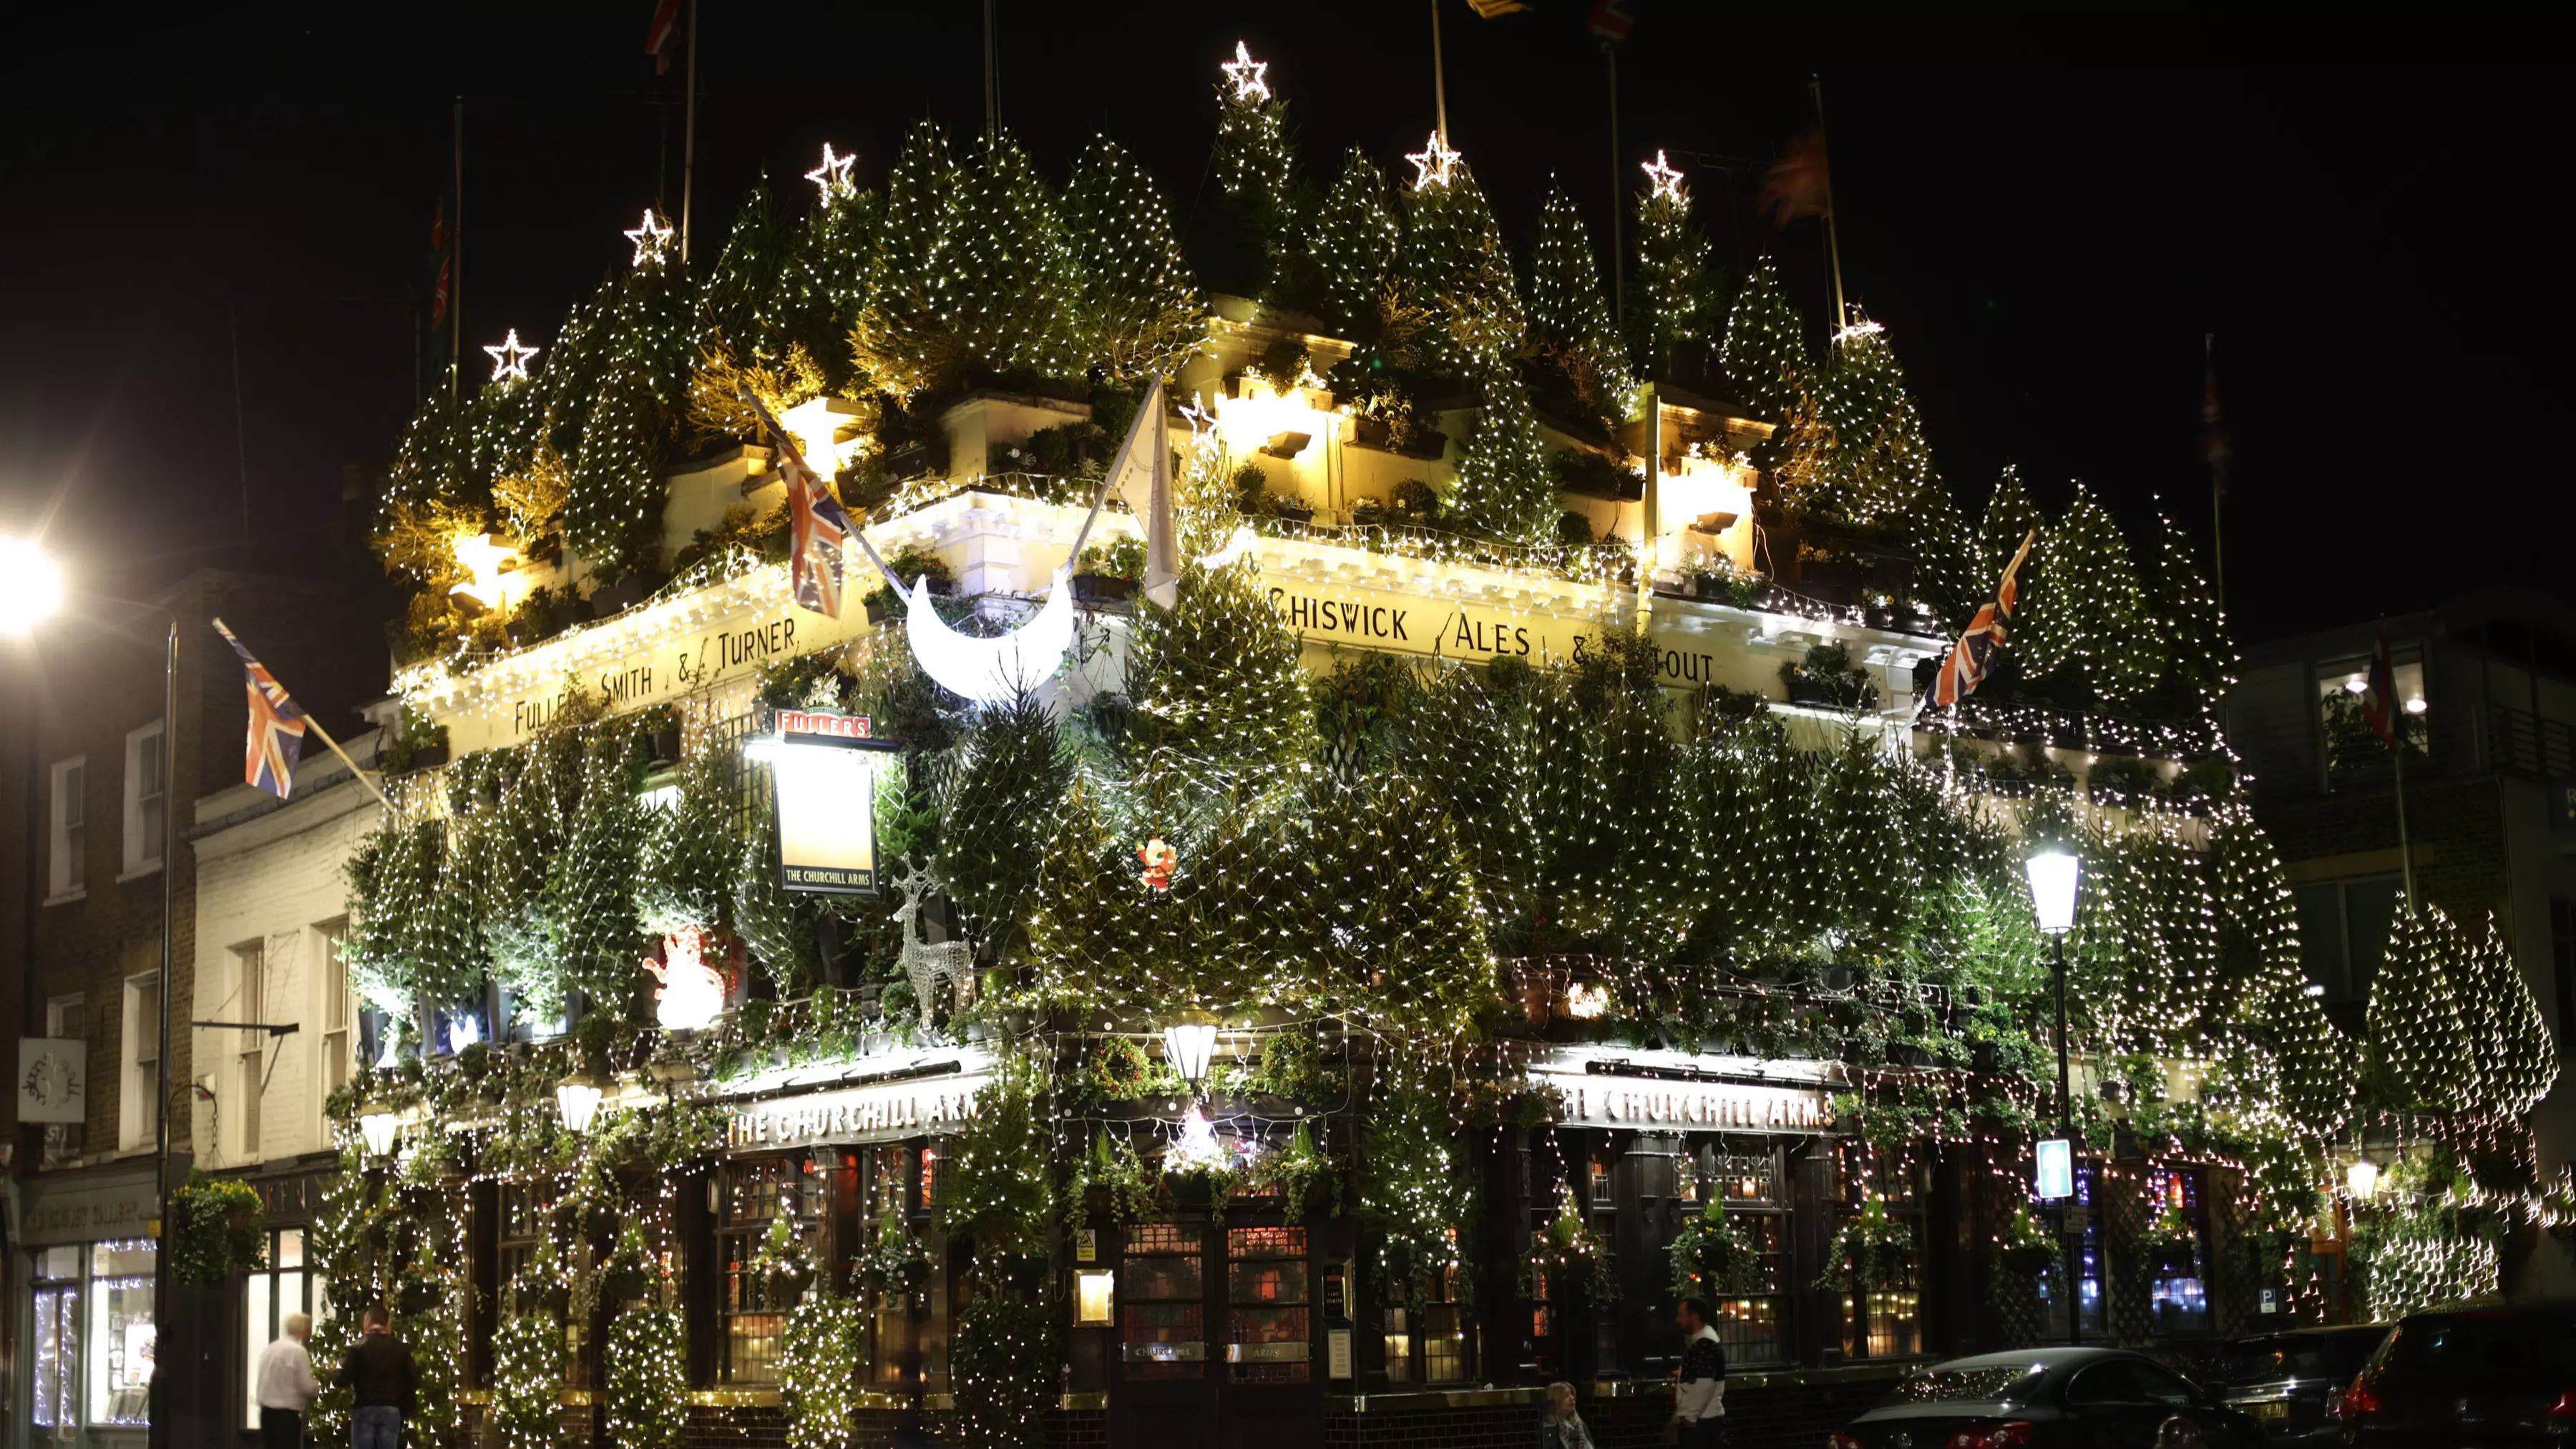 The Most Christmassy Pub In London Has Turned On Its Lights